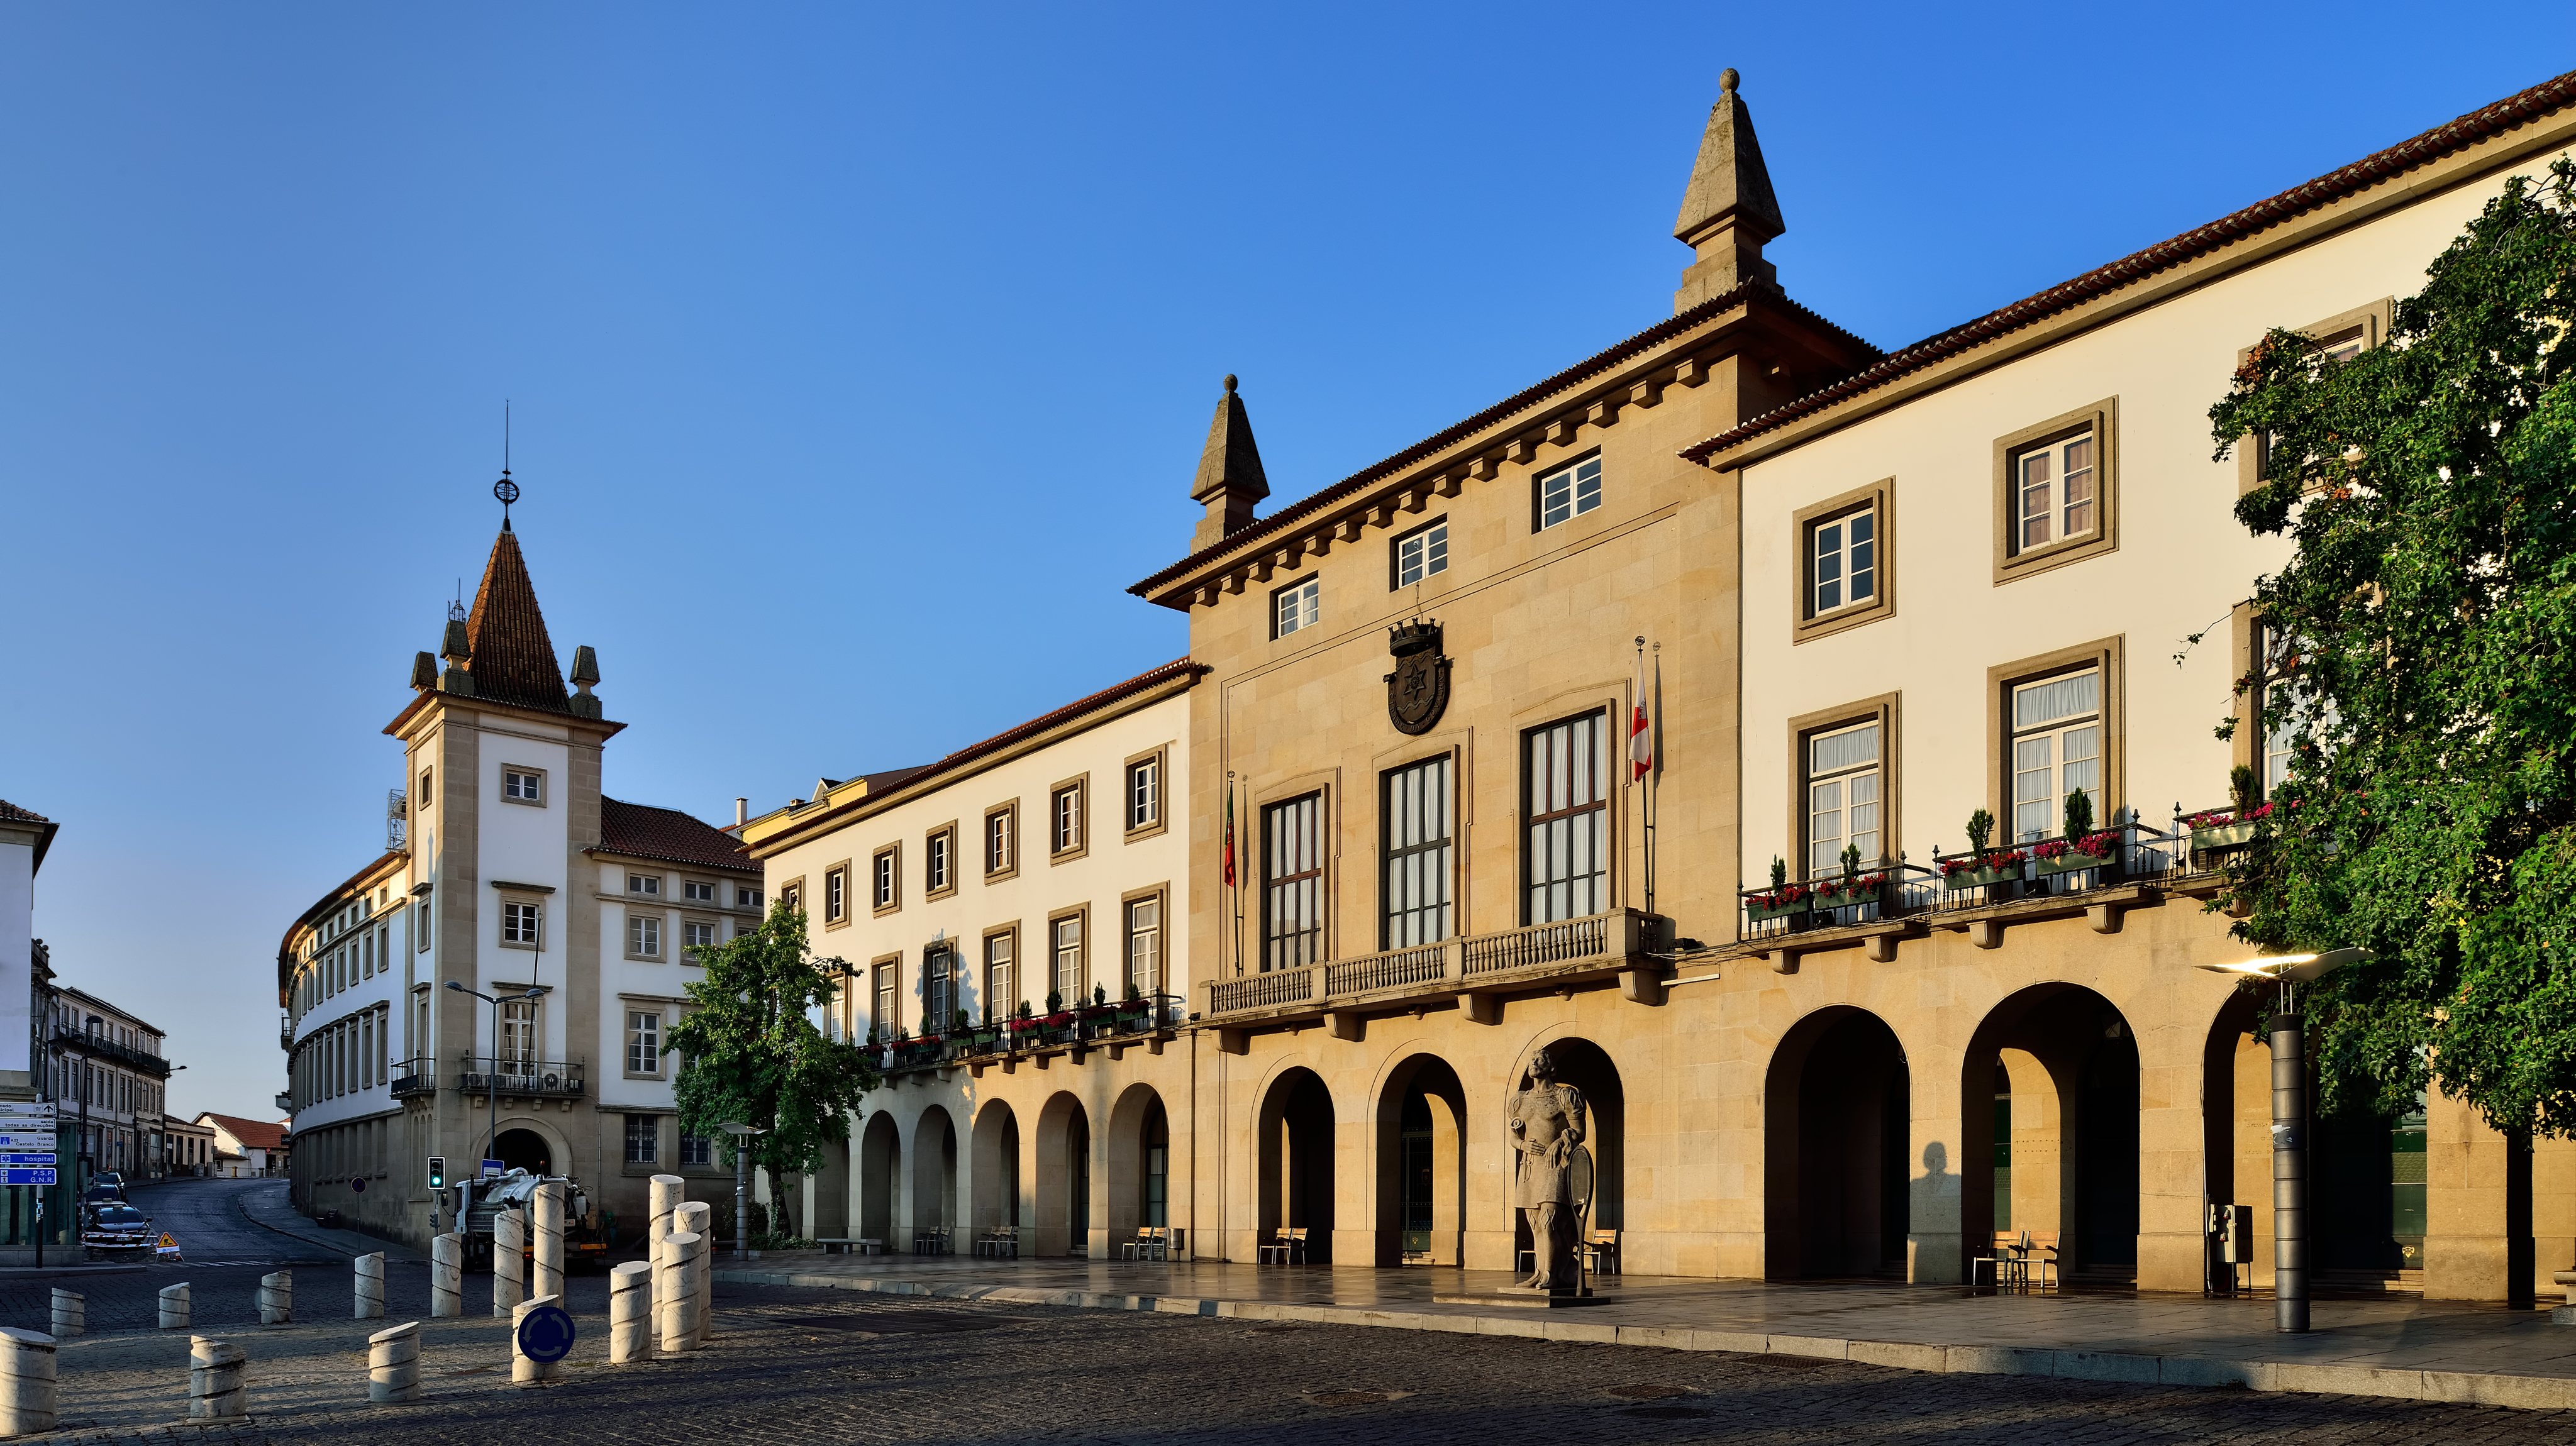 Covilhã - Town square and city hall